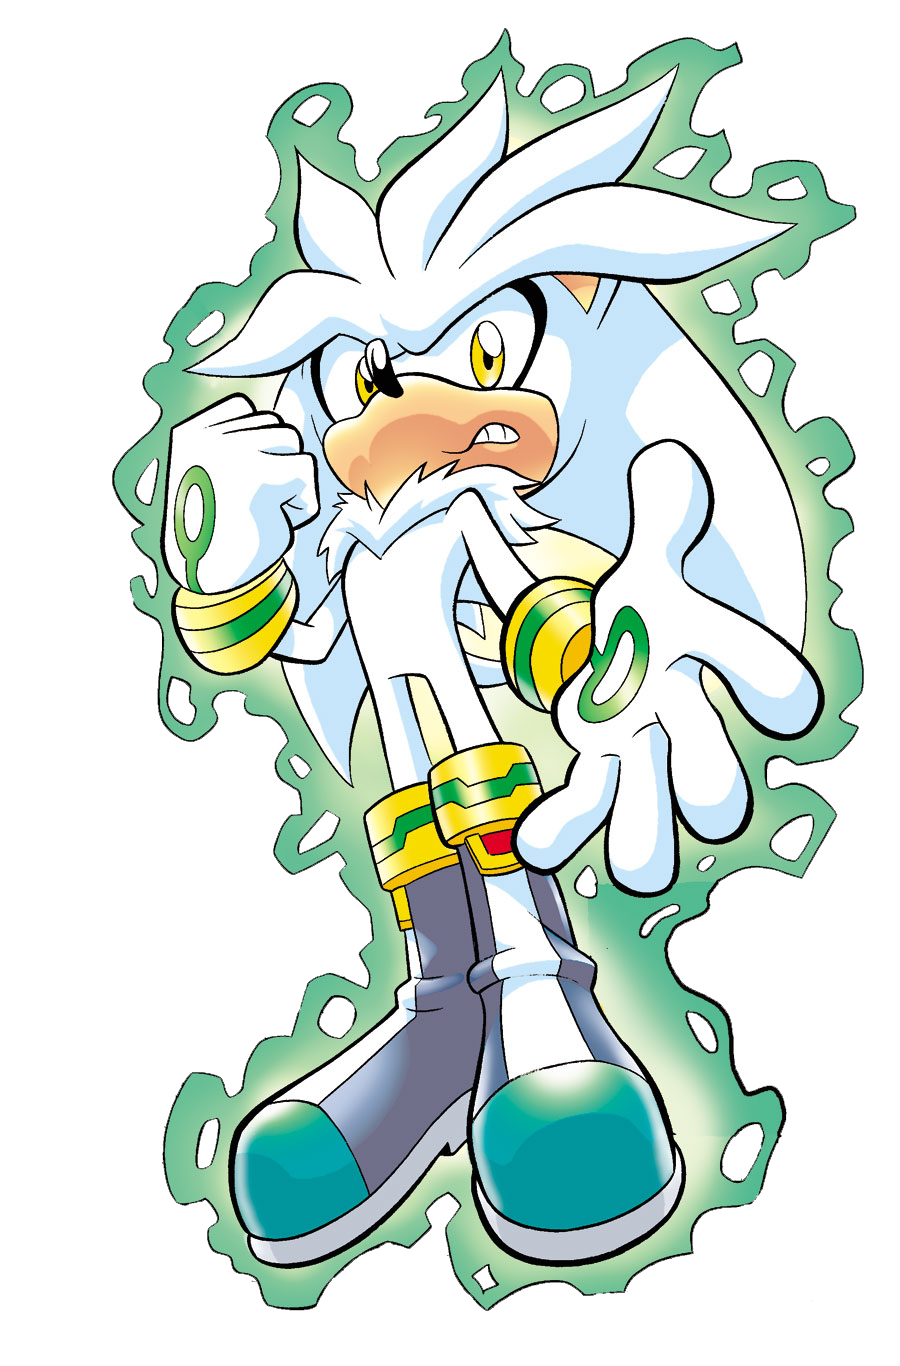 http://images2.wikia.nocookie.net/__cb20100818230011/sonic/images/1/17/SilverArchiebySenSilv.png